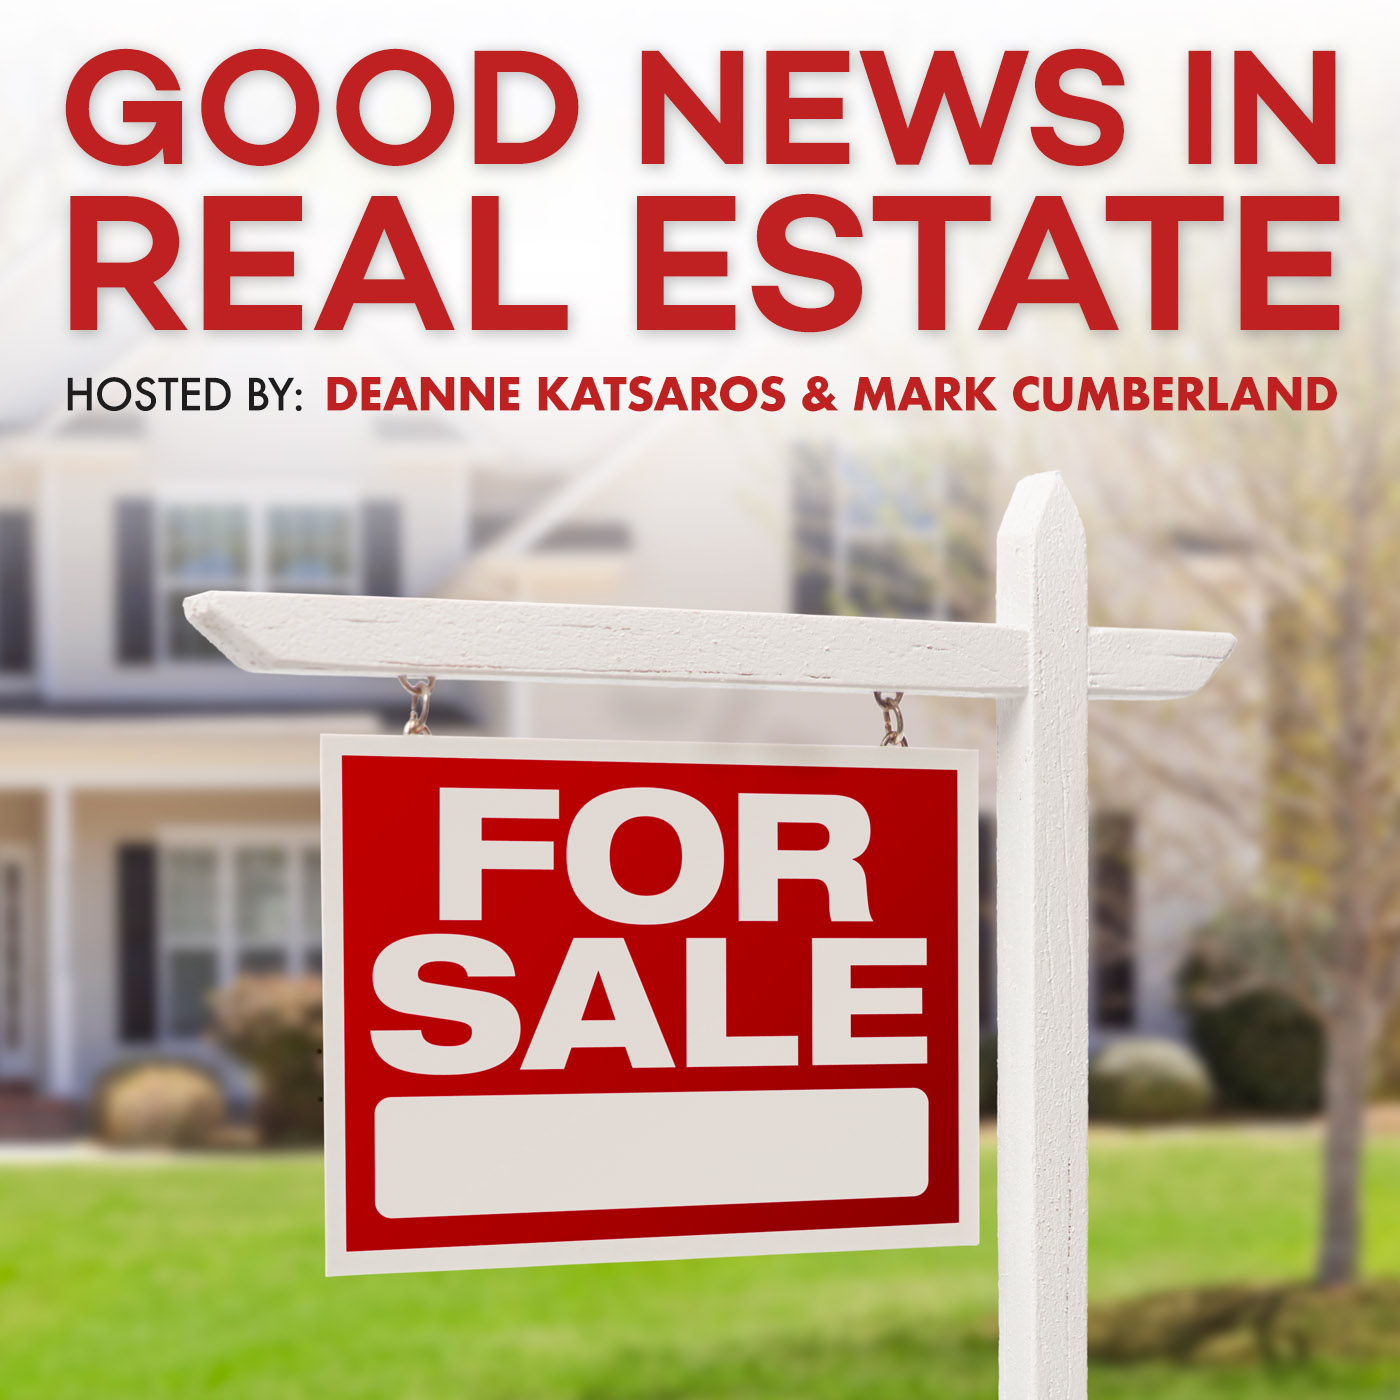 March 27, 2021 | Good News in Real Estate